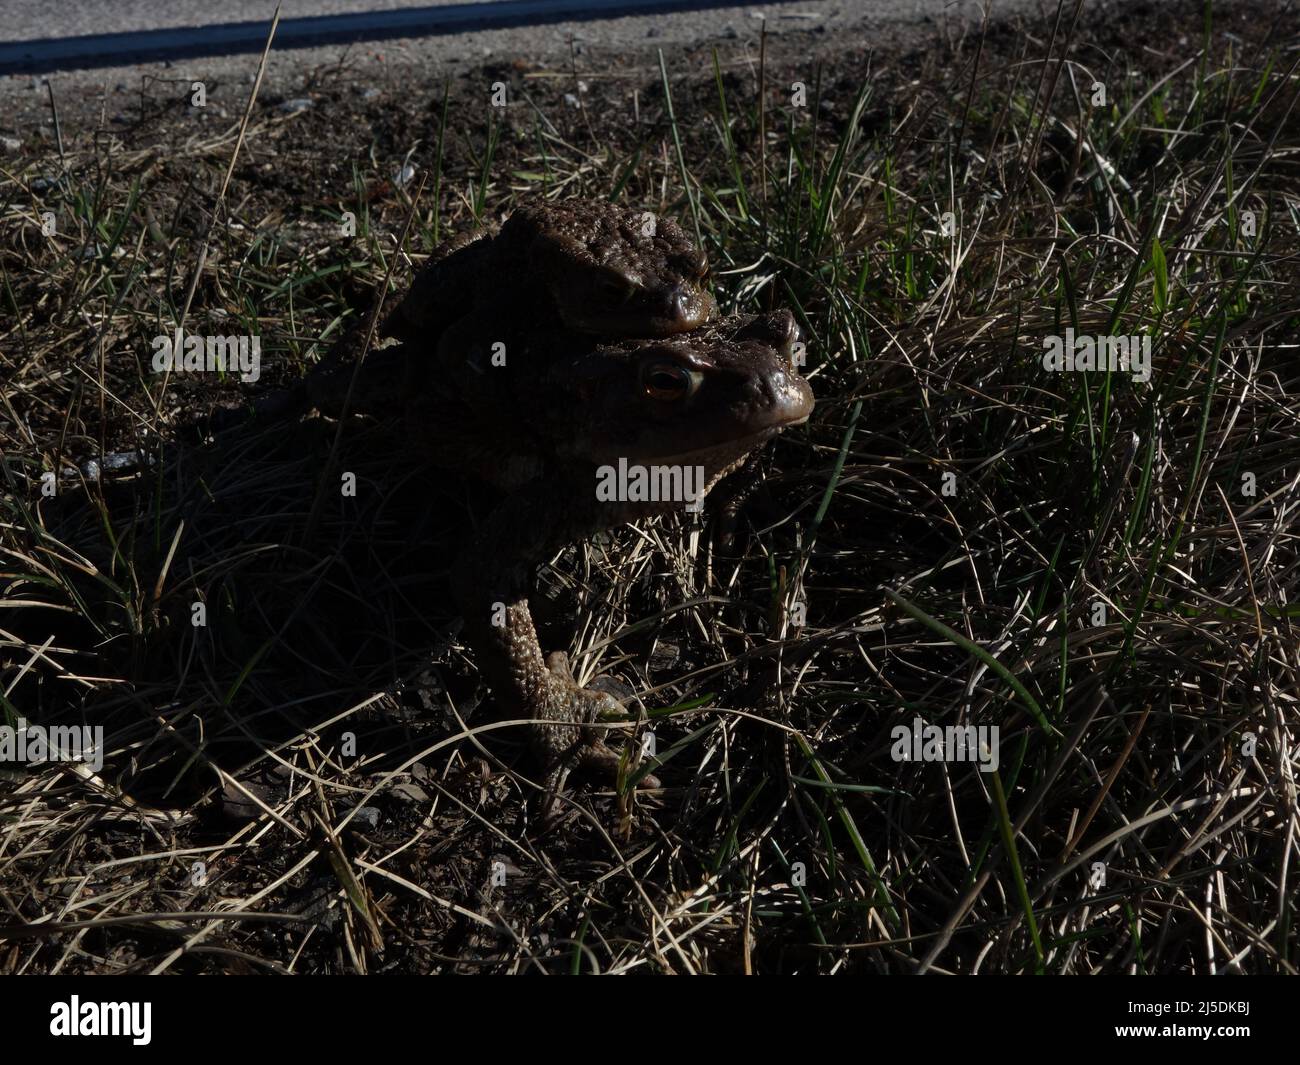 A male toad rides piggy back on a female toad, a small rest at the roadside, after having survived the dangerous crossing of the road. Stock Photo